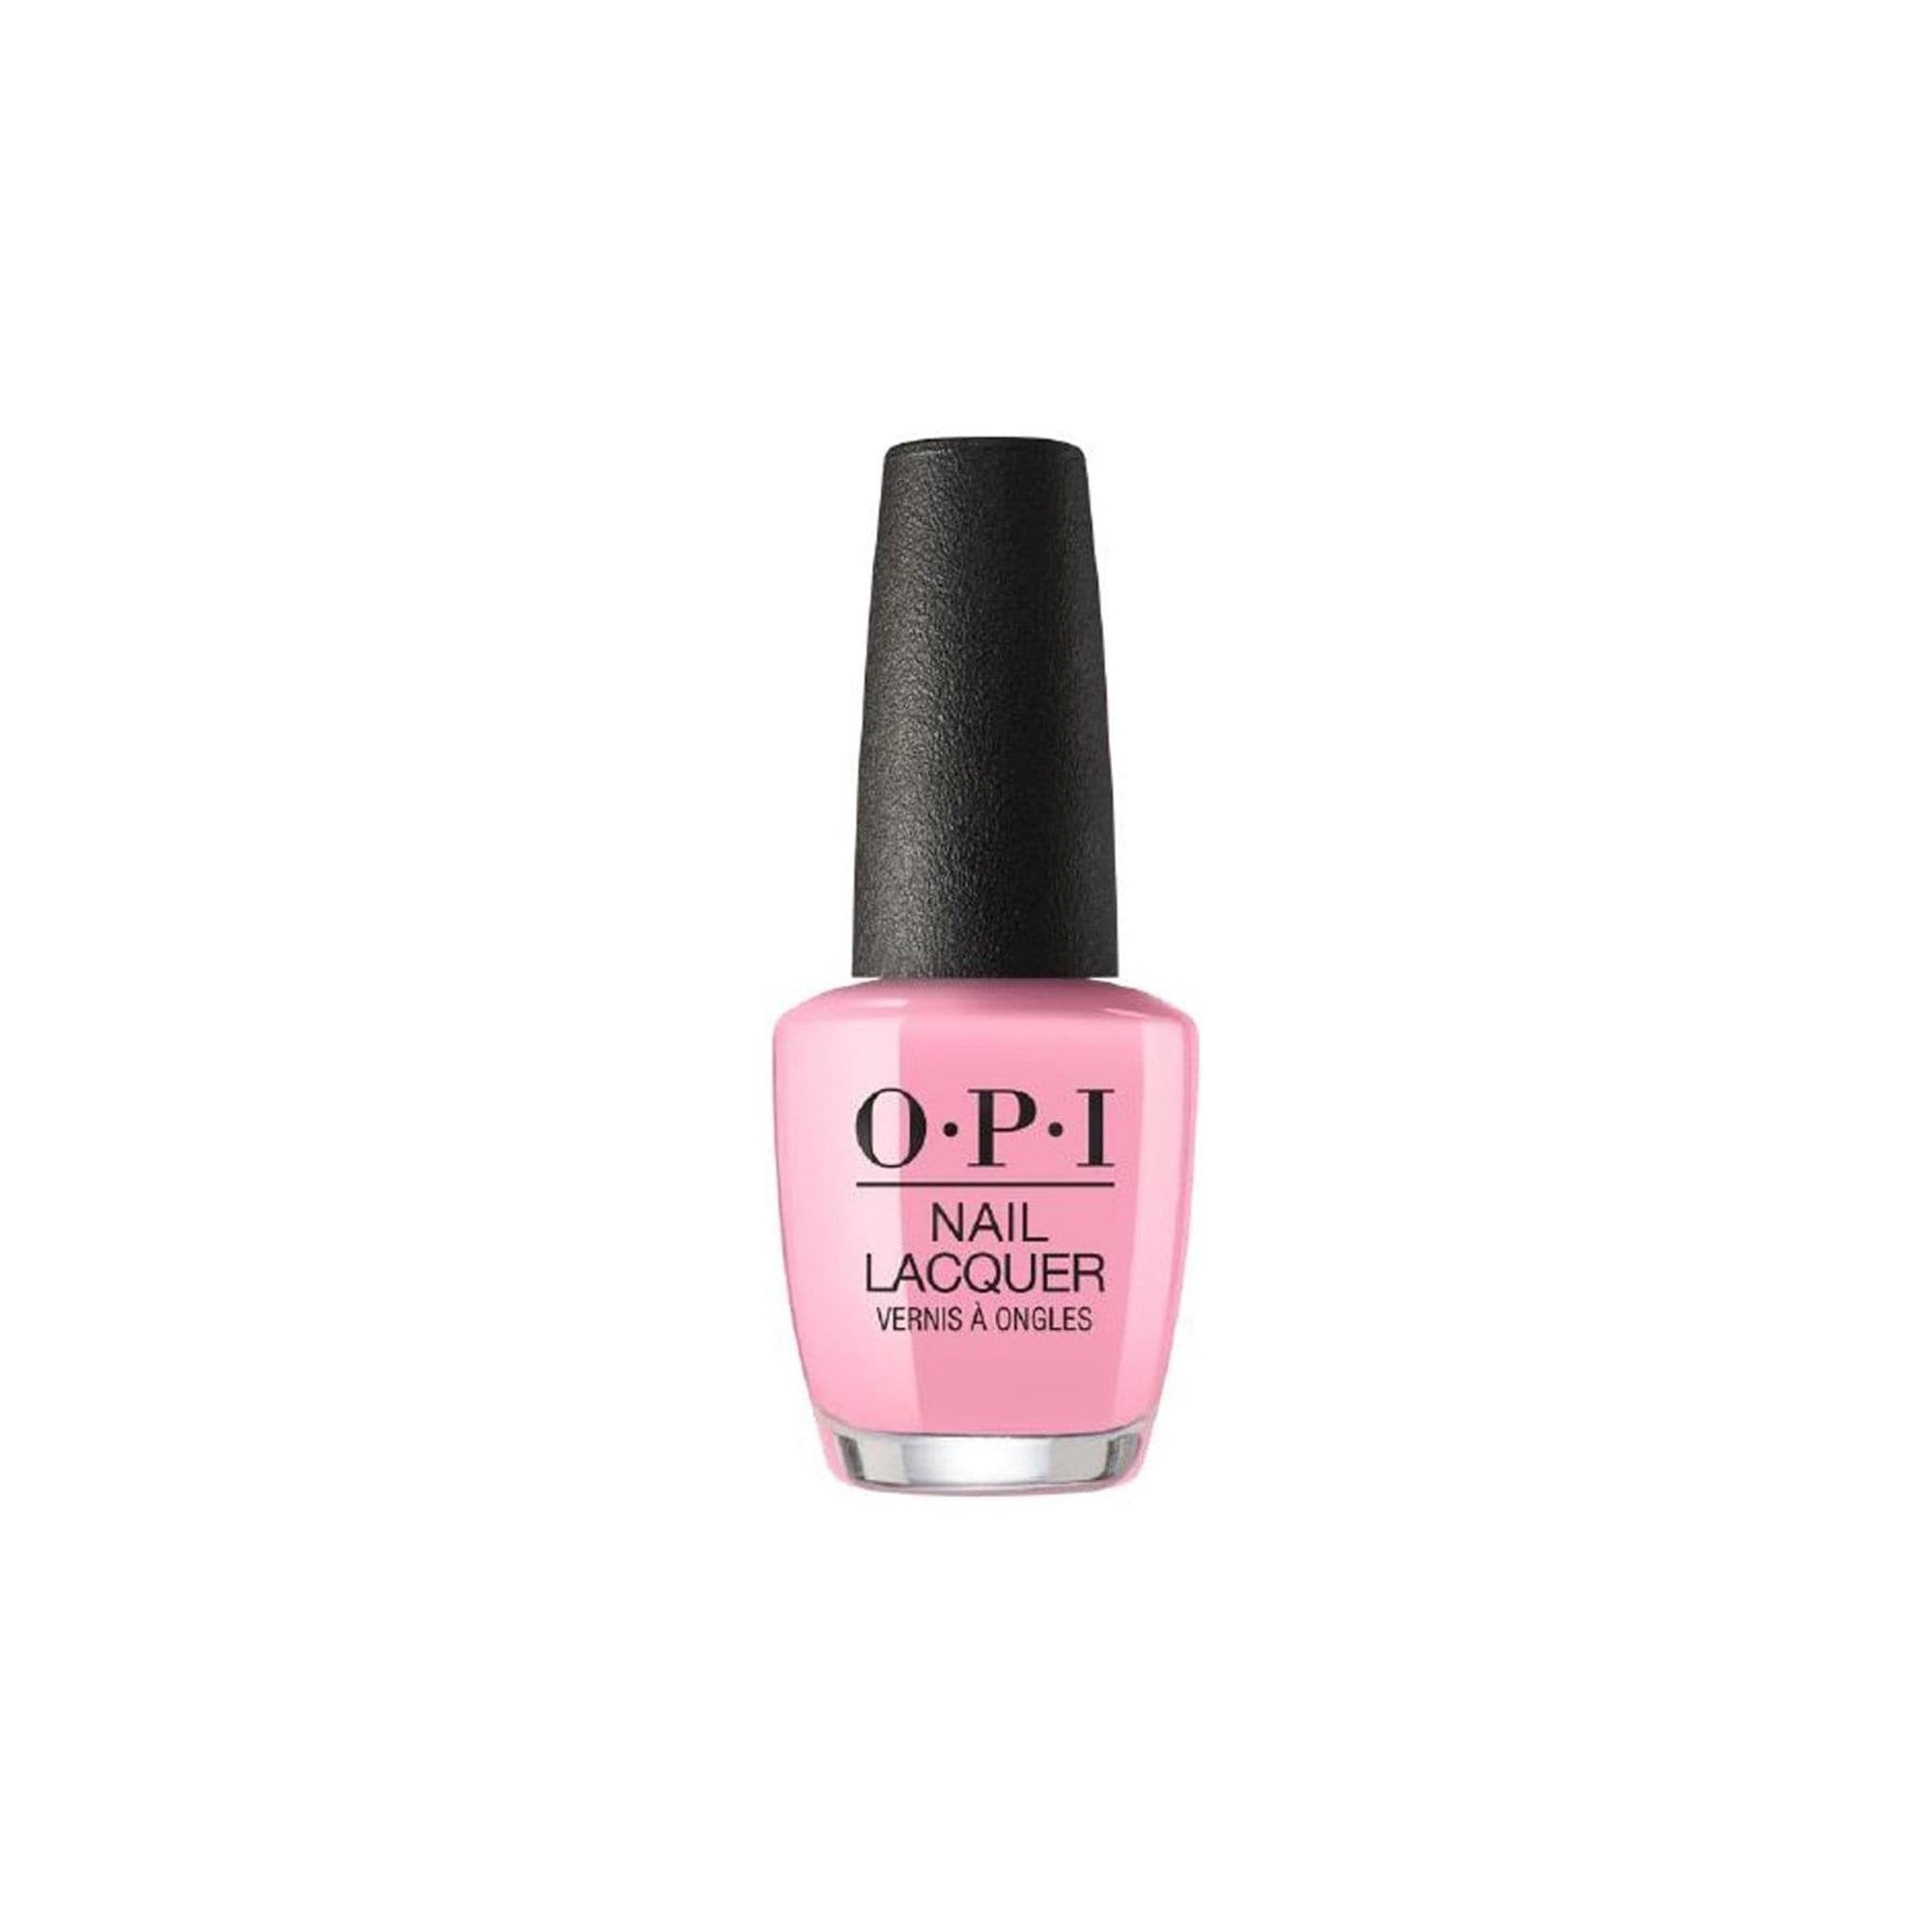 O.P.I Nail Lacquer - Tagus In That Selfie!